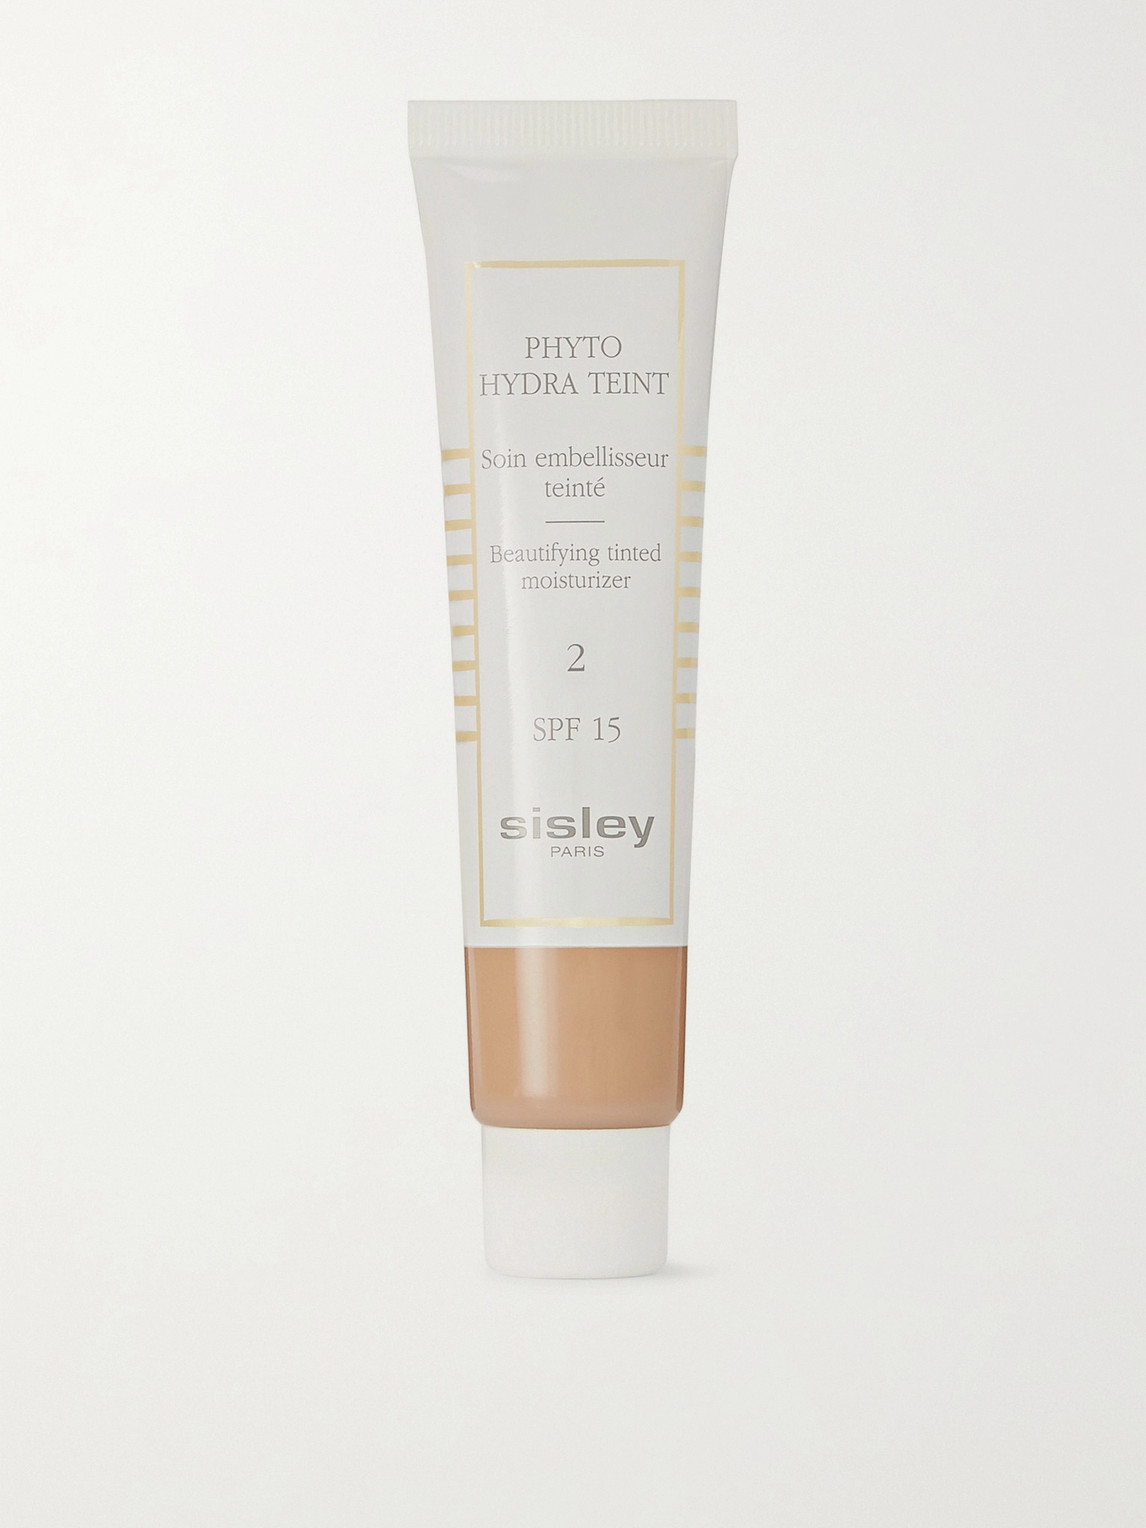 Sisley Paris Phyto Hydra Teint Beautifying Tinted Moisturizer Spf15 In Colorless